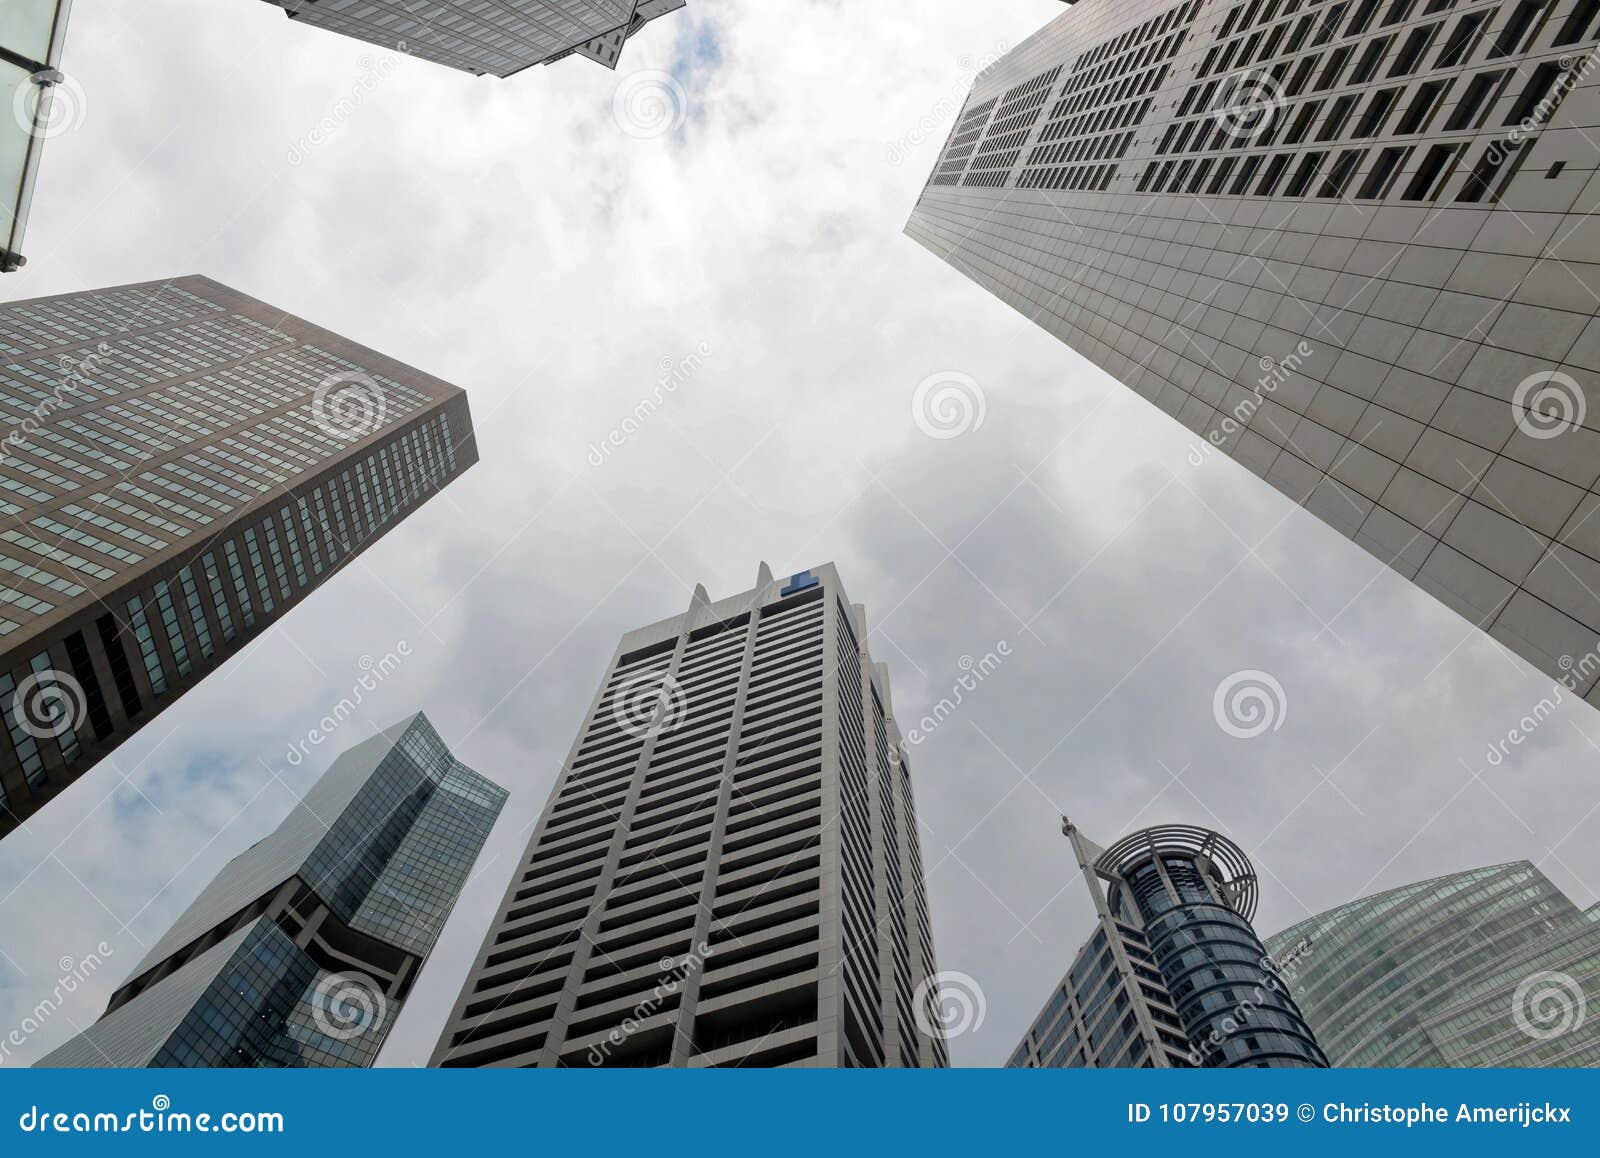 singapore skyscrappers